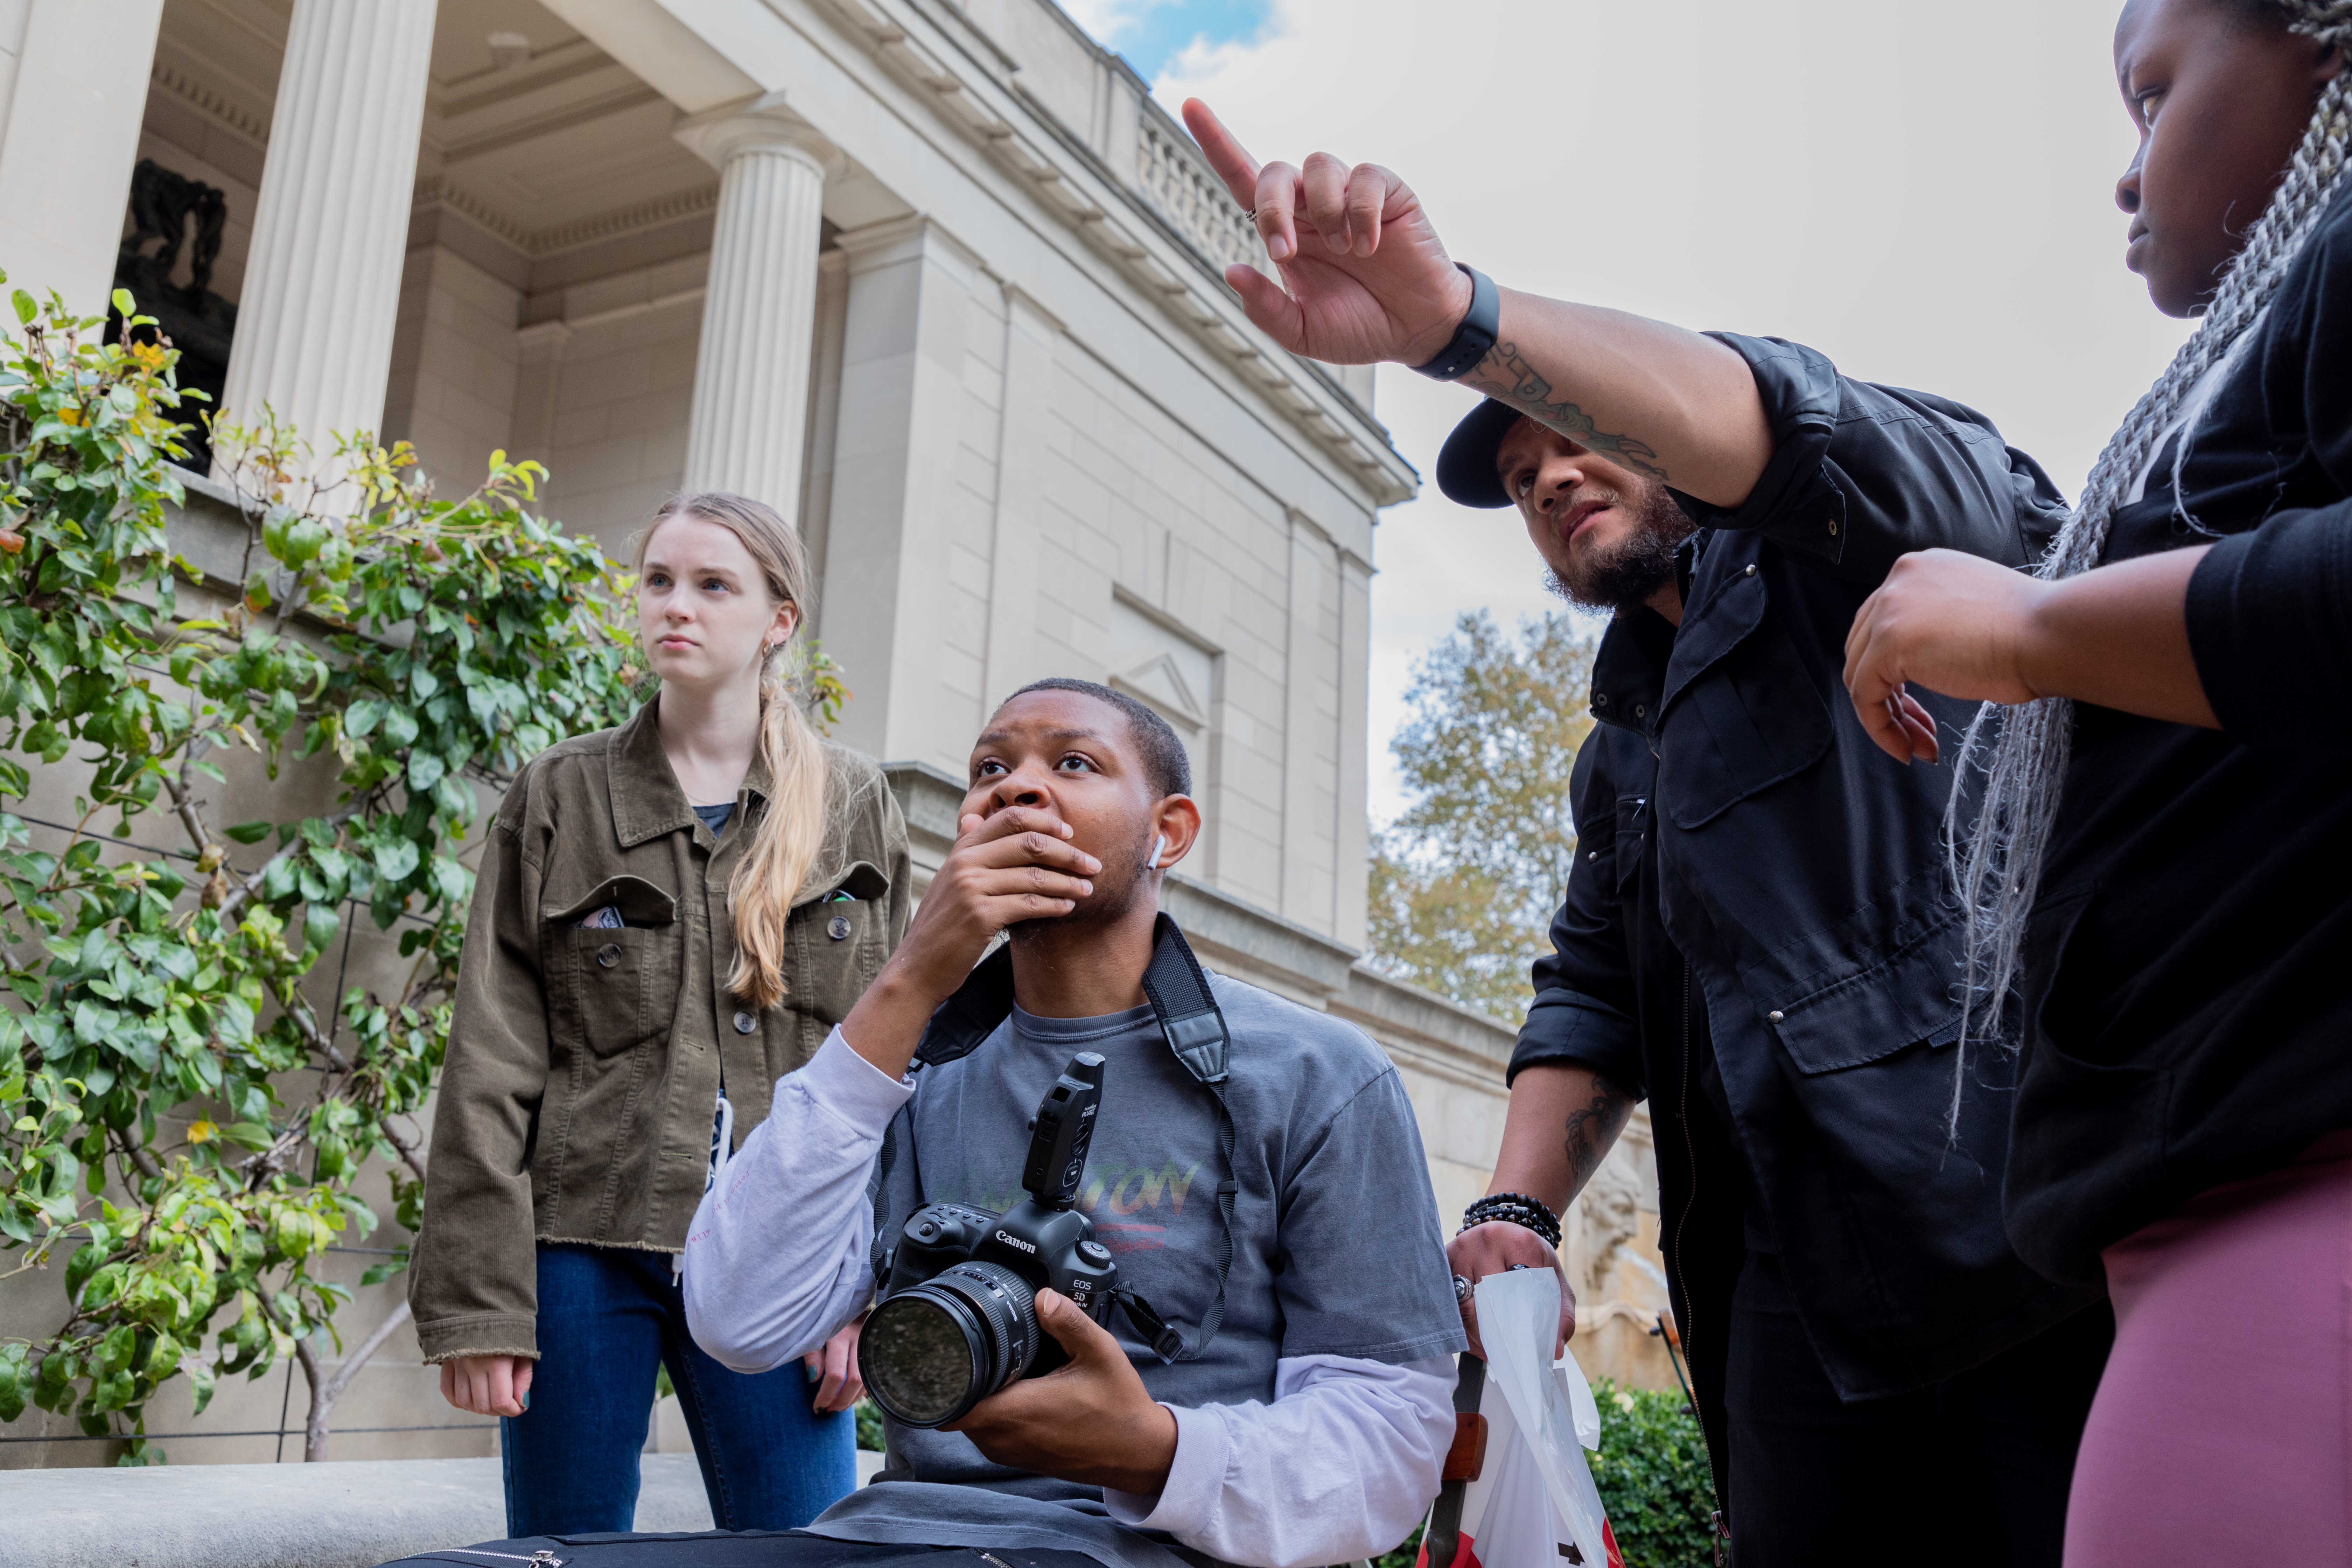 Students pointing to a looking at a photography subject they are about to capture